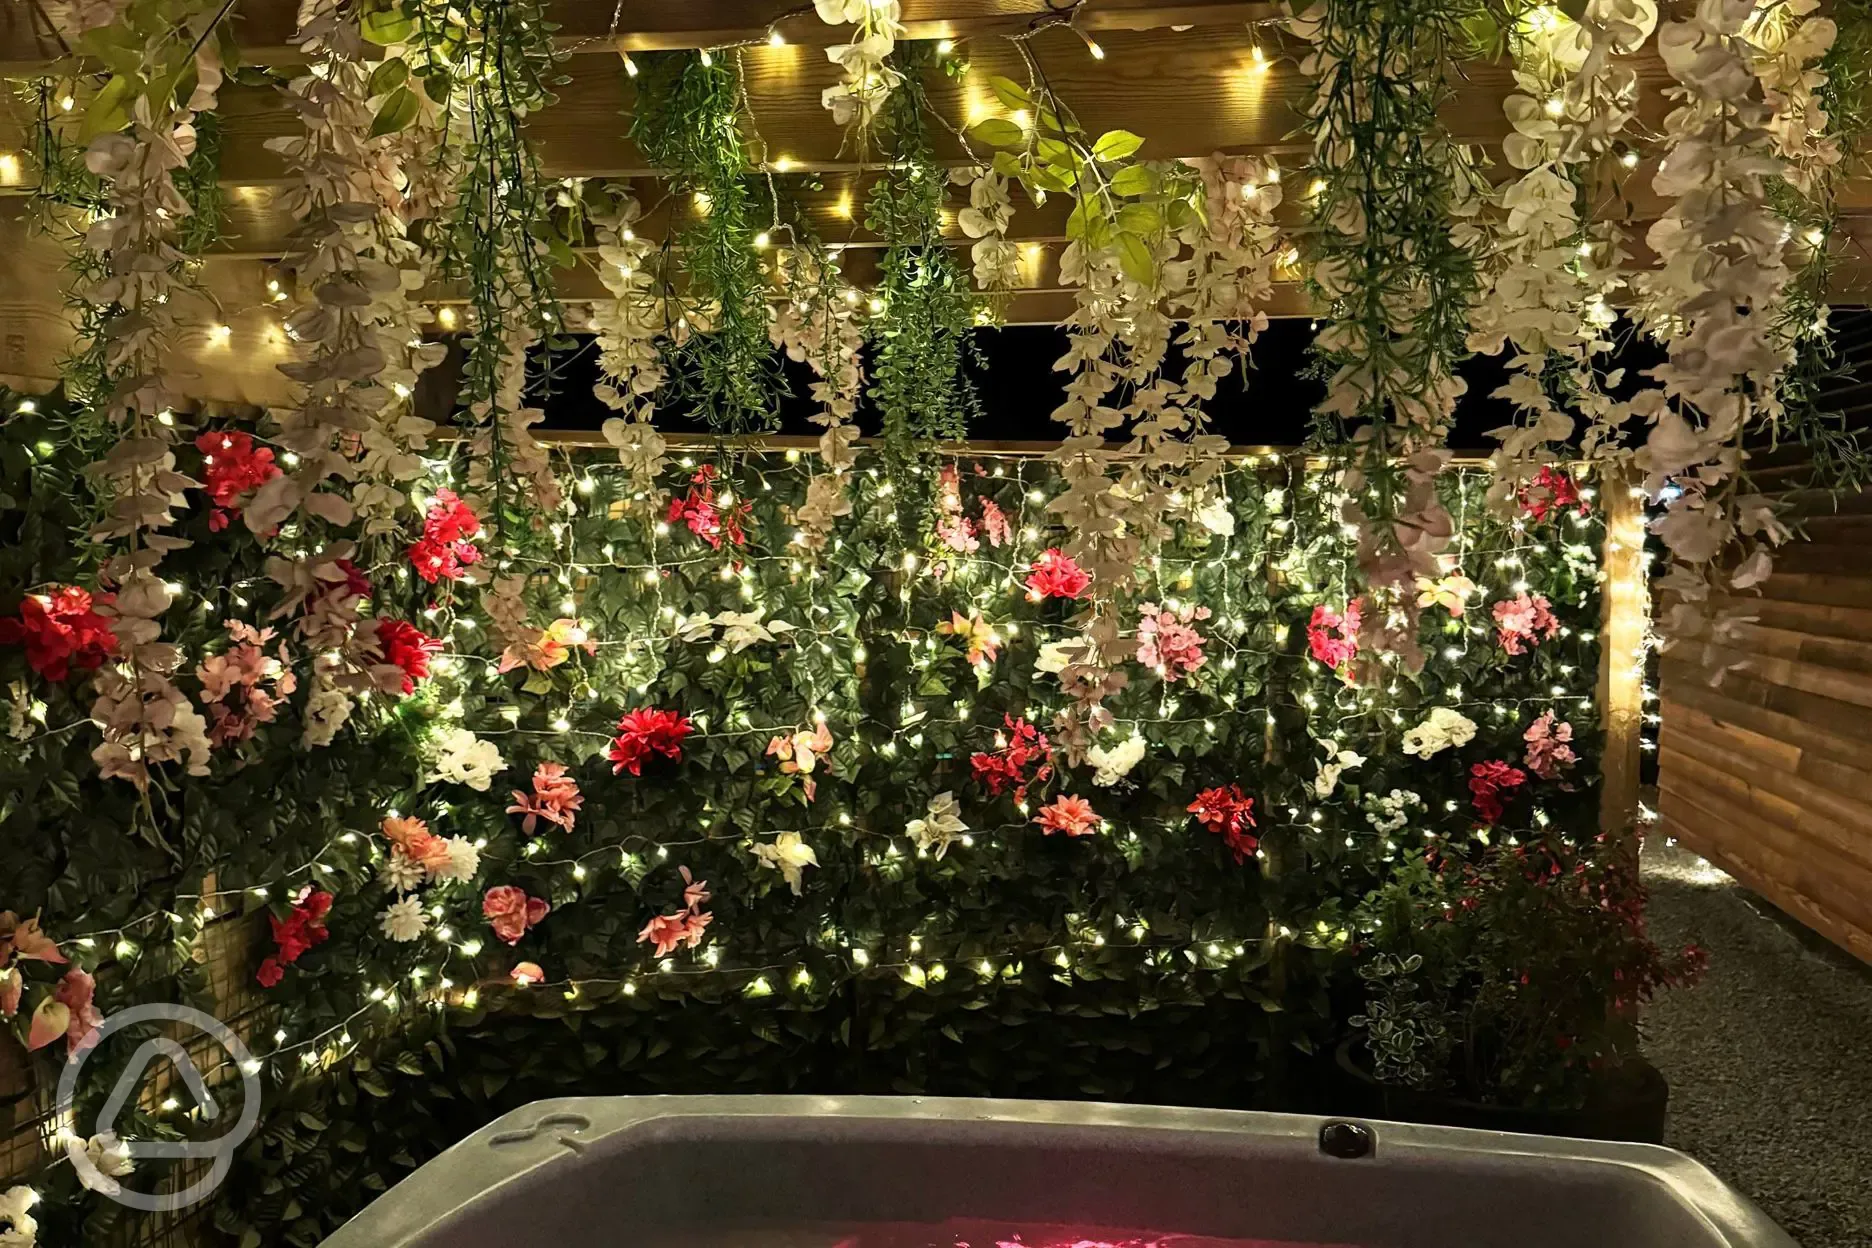 Hot tub - VIP with floral walls